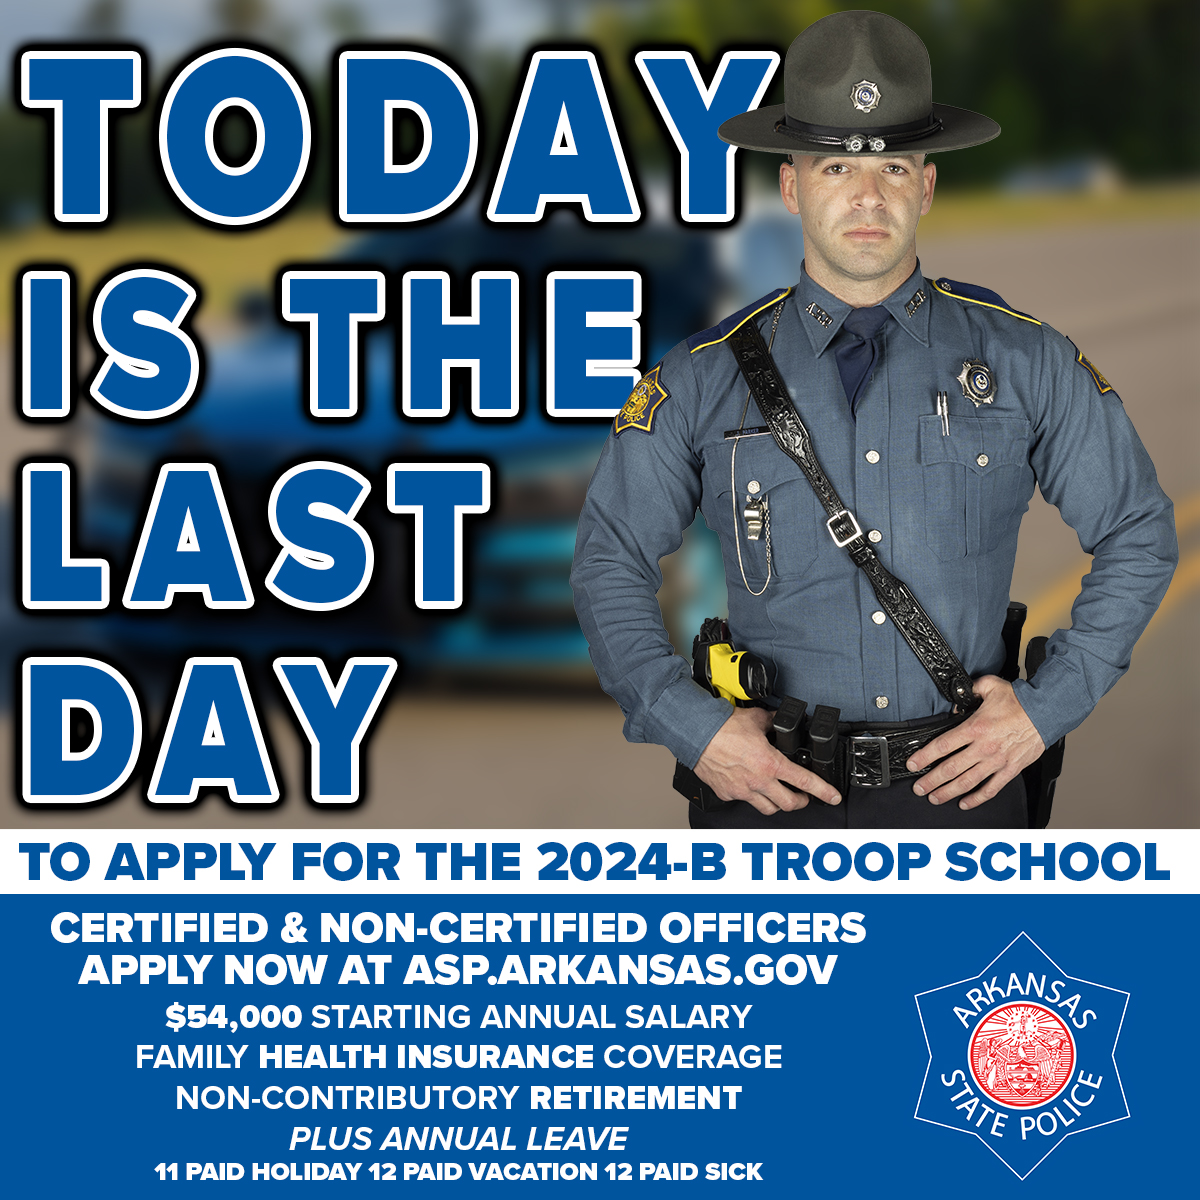 Today is the FINAL DAY to apply for Troop School 2024-B! The school, scheduled to begin in October, is open to CERTIFIED AND NON-CERTIFIED applicants. Visit: bit.ly/ASPTroopSchool… for details on the application process. APPLICATION DEADLINE: 04/30/2024 – 11:59 p.m.